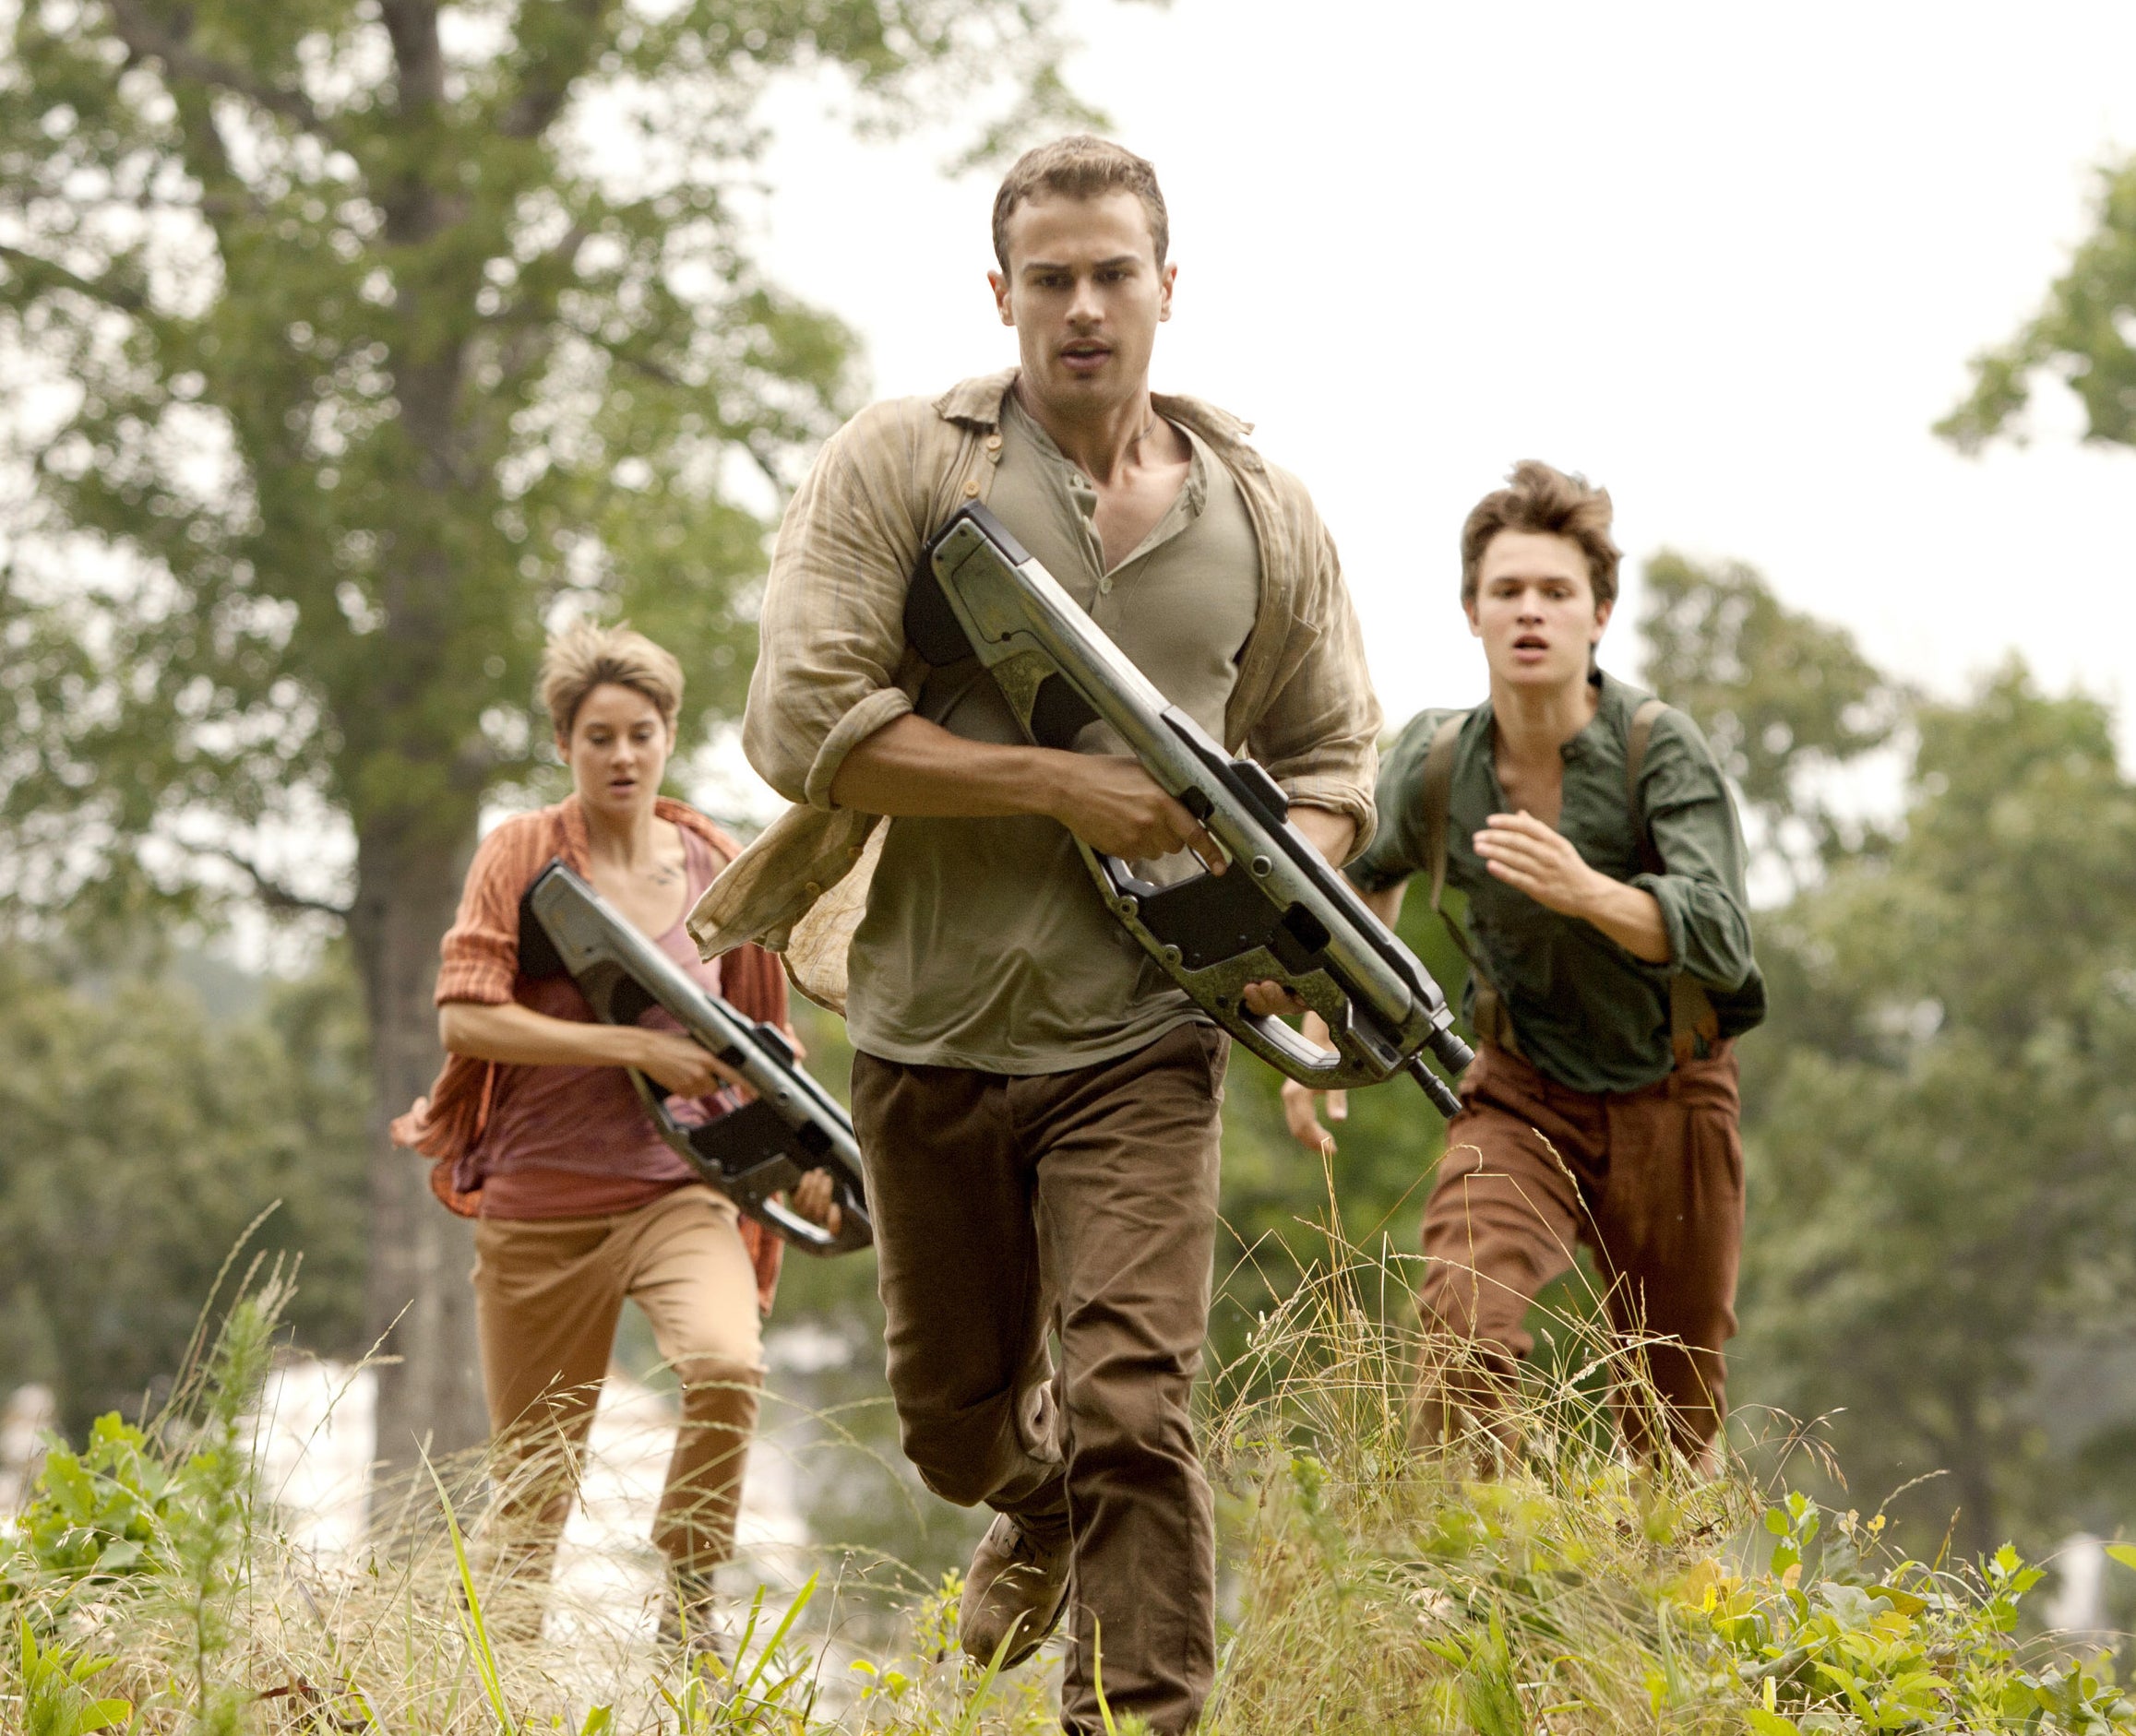 Shailene Woodley, Theo James, and Ansel Elgort running in an action scene in &quot;The Divergent Series: Insurgent&quot;